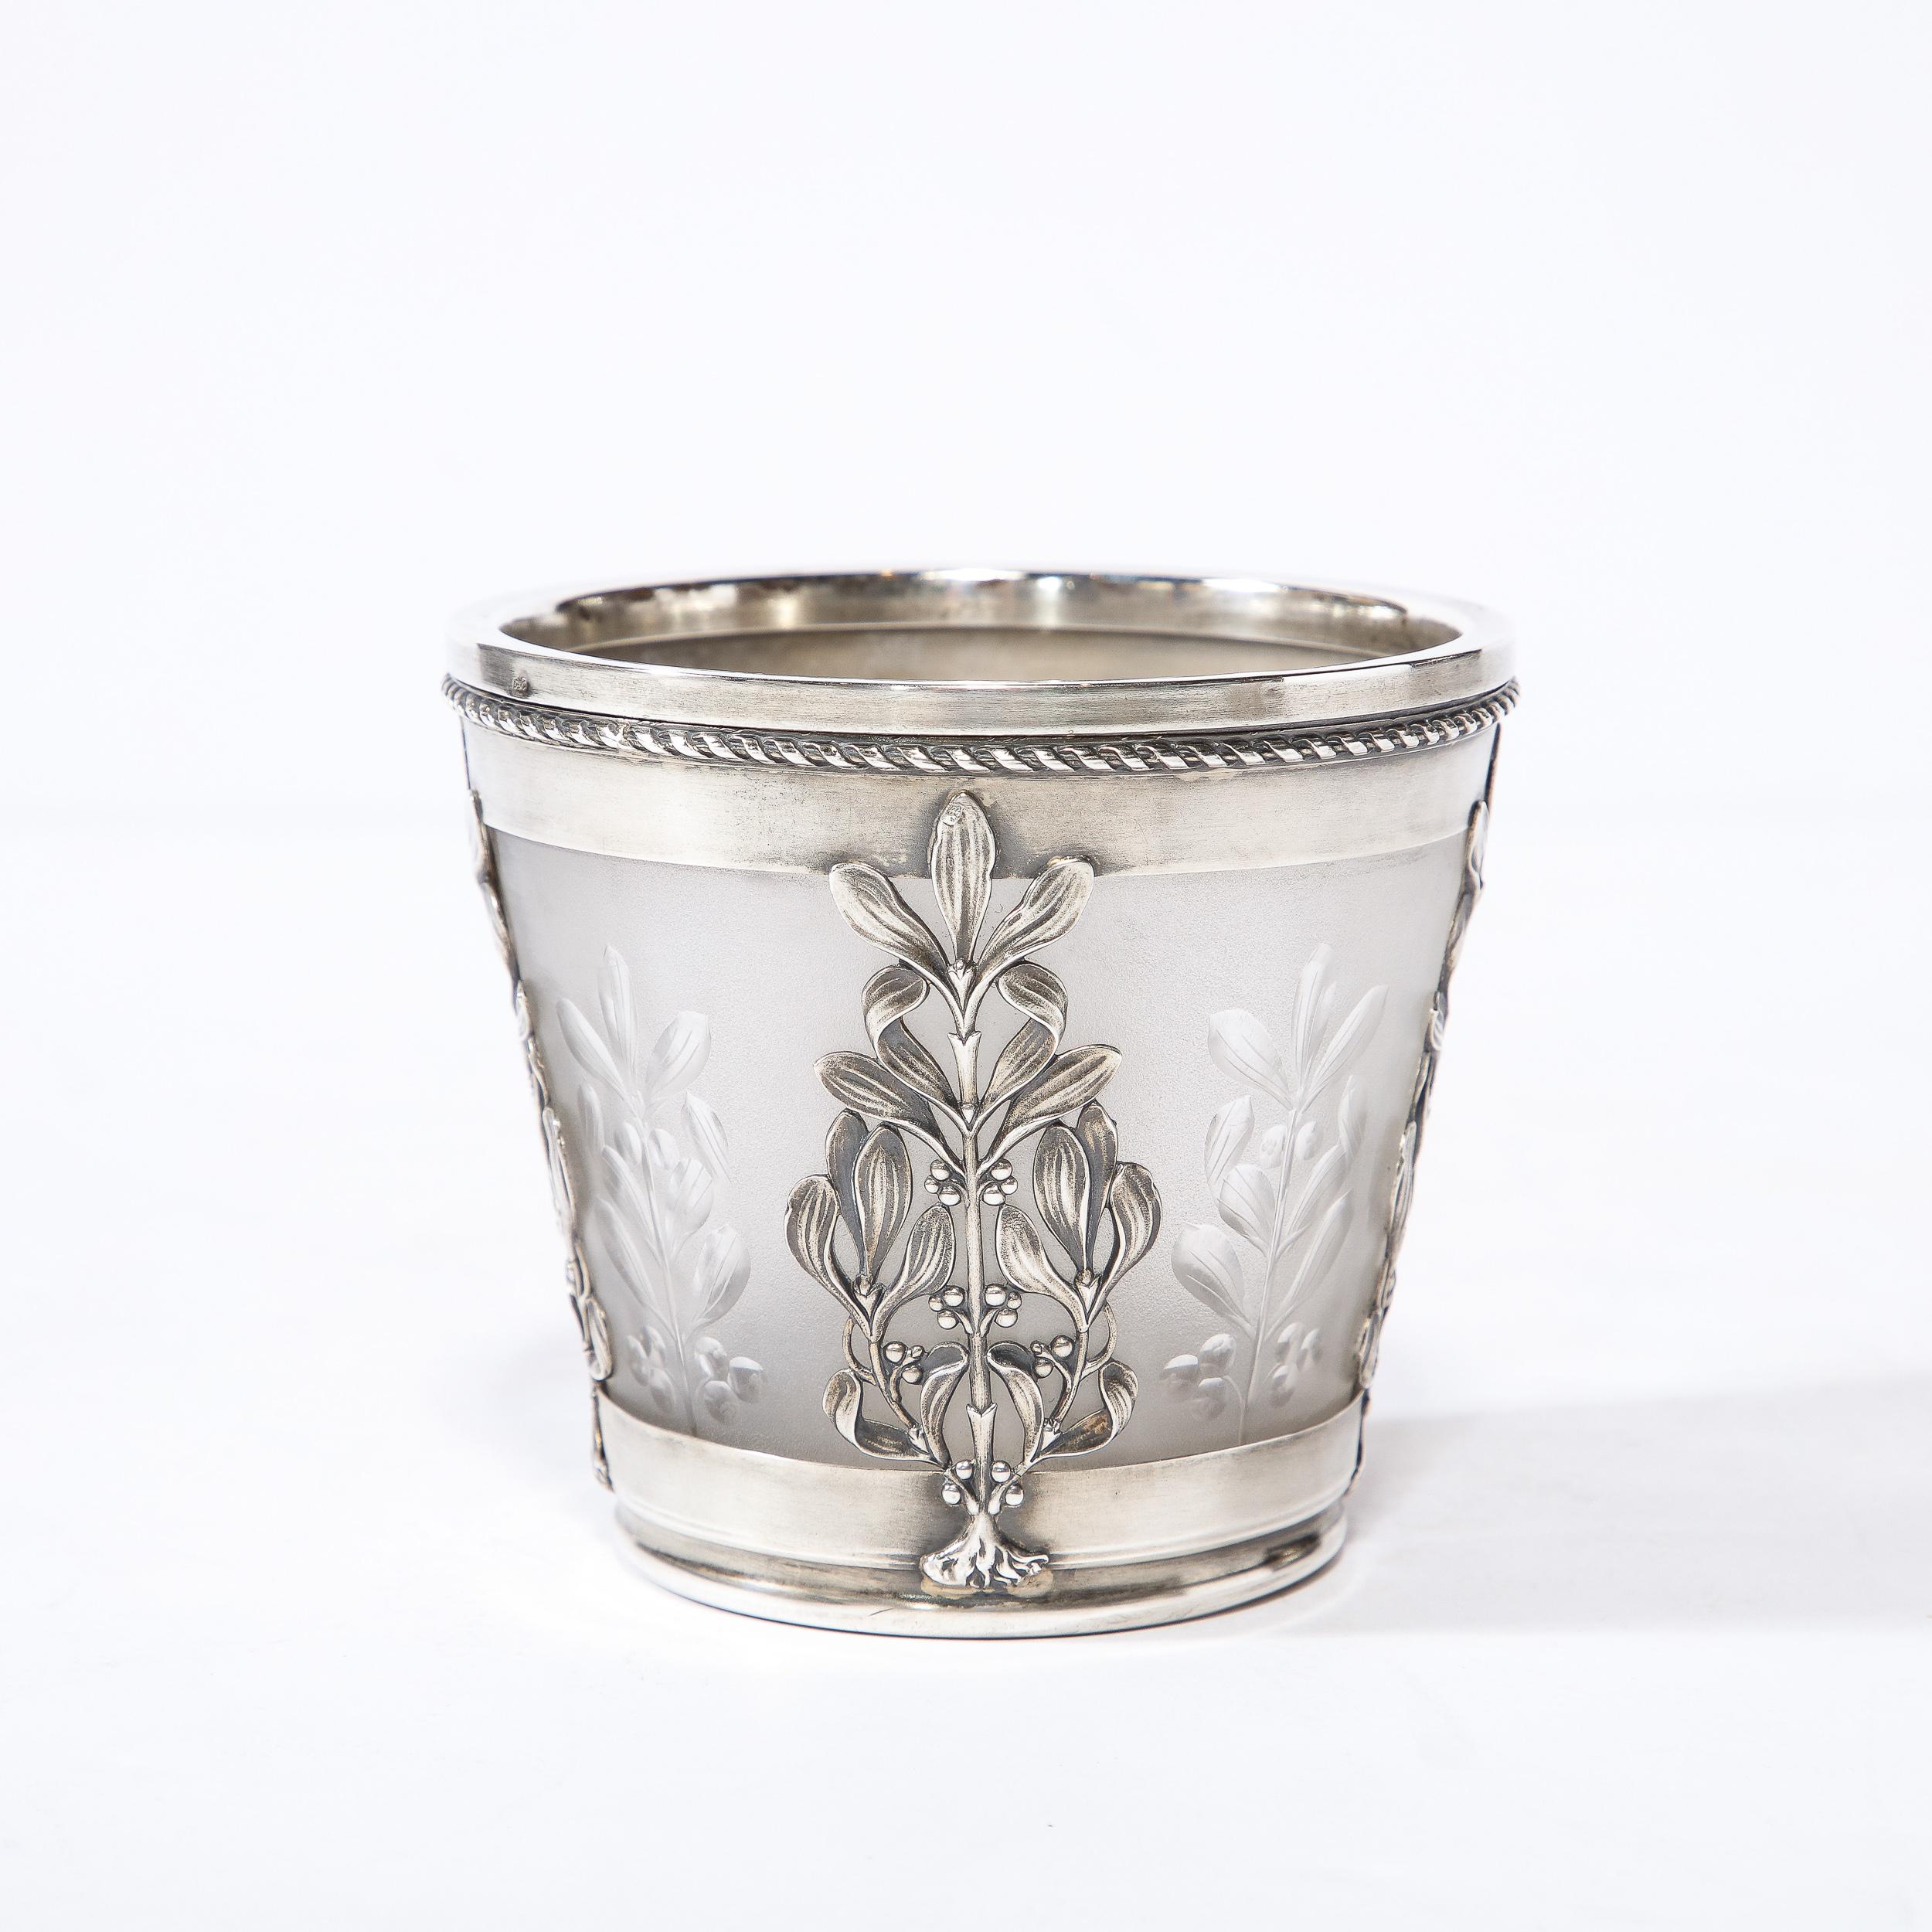 This elegant Art Nouveau Cachepot was realized by the esteemed silversmith Emile Langlois in France circa 1900. It offers a subtly conical form with stylized foliate forms, suggestive of olive trees, etched into the frosted glass body. Olive tree